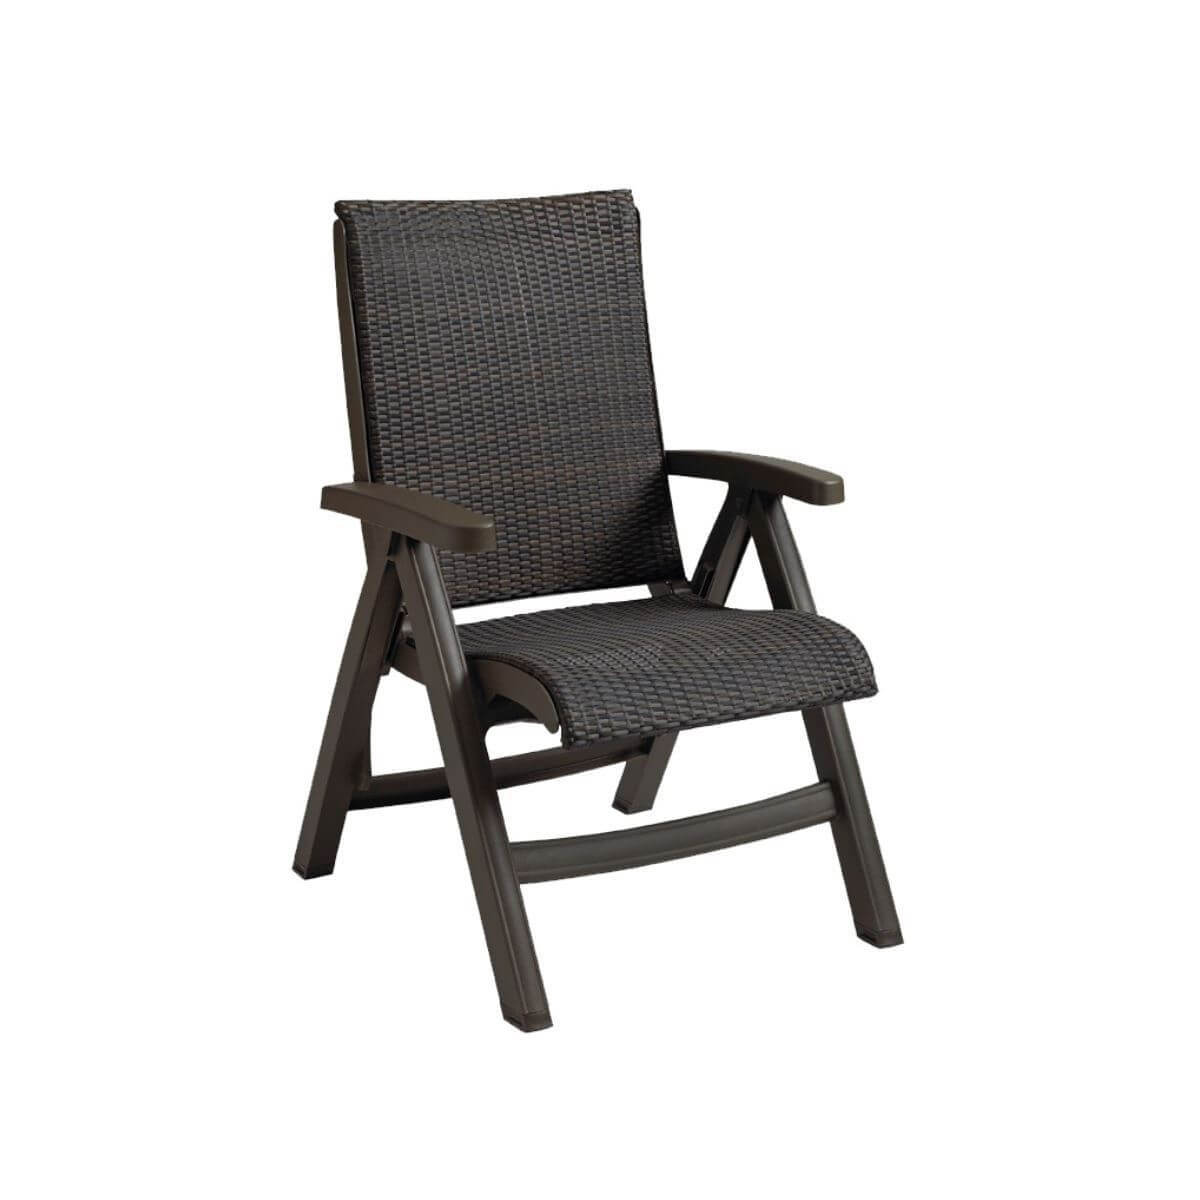 0009342 Java All Weather Wicker Folding Chair Stackable 21 Lbs 